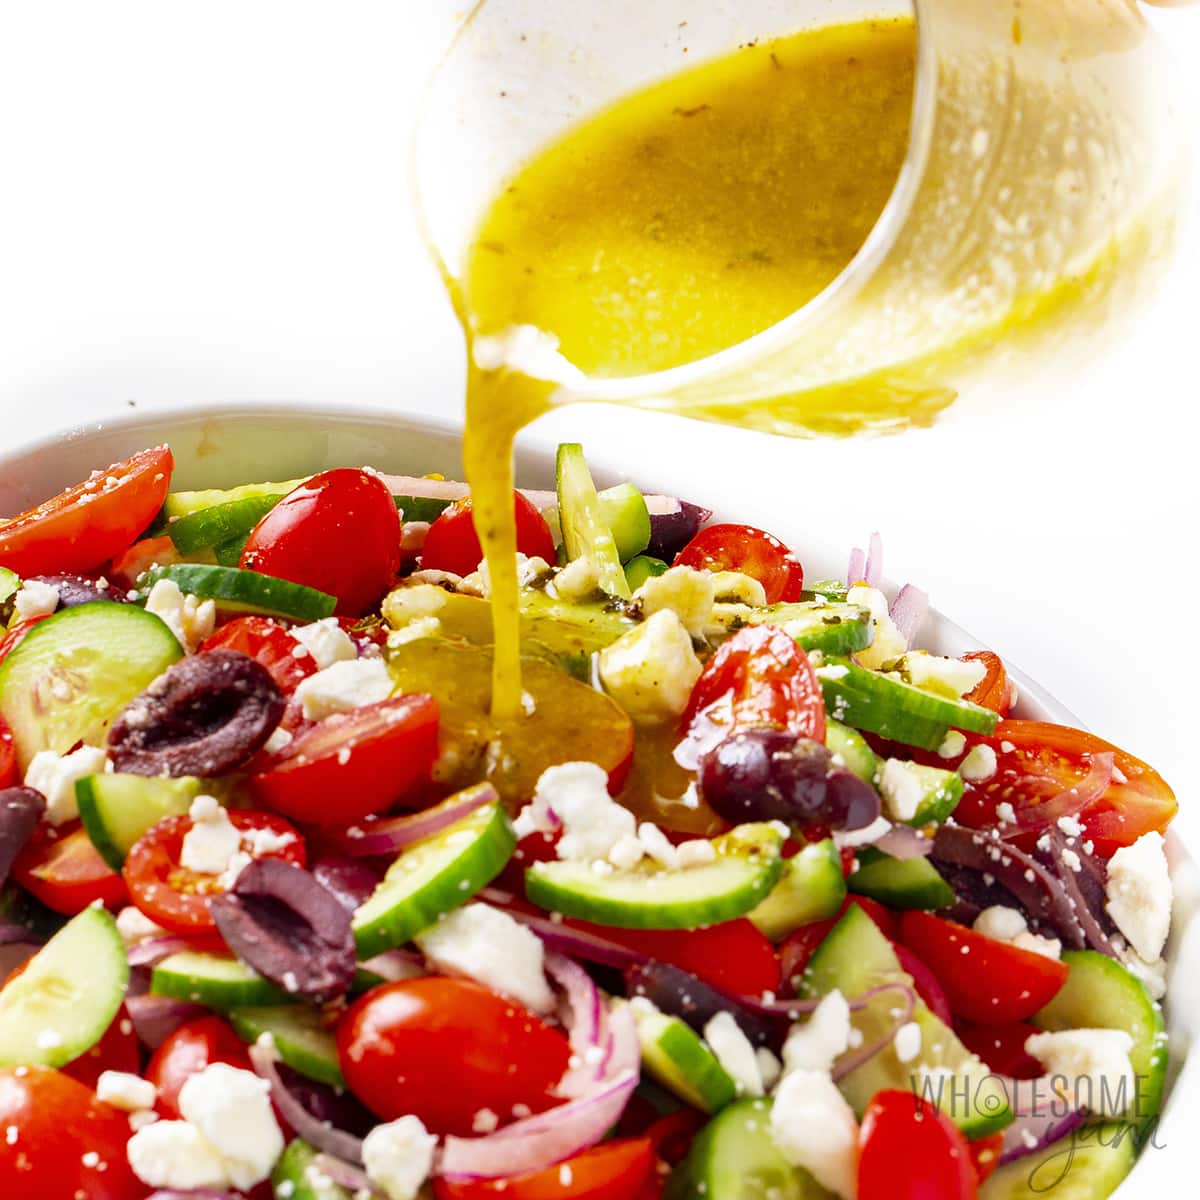 Dressing poured on Greek salad in a bowl.